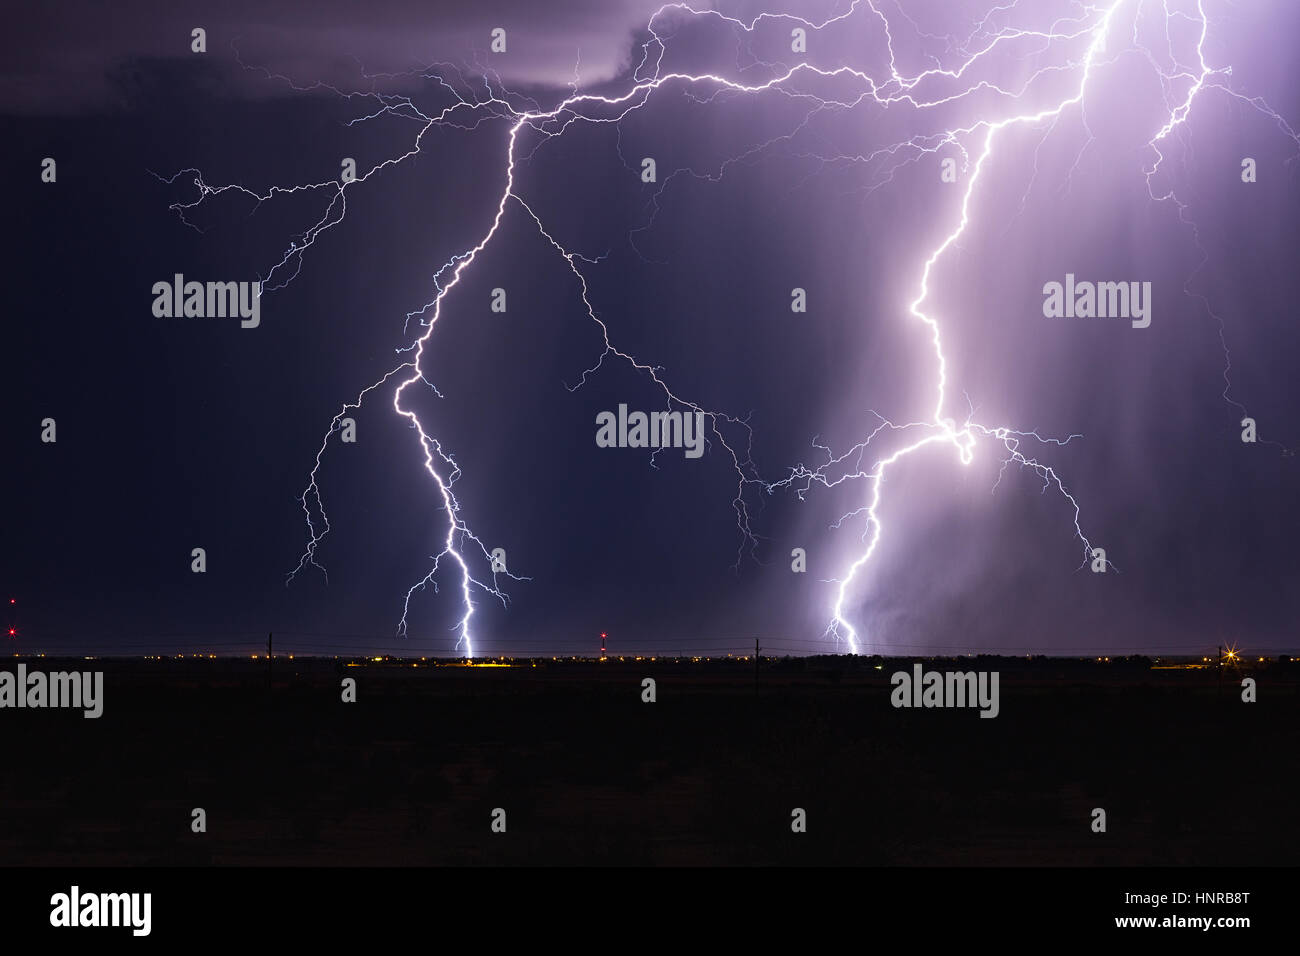 Dramatic lightning strike in a storm at night Stock Photo